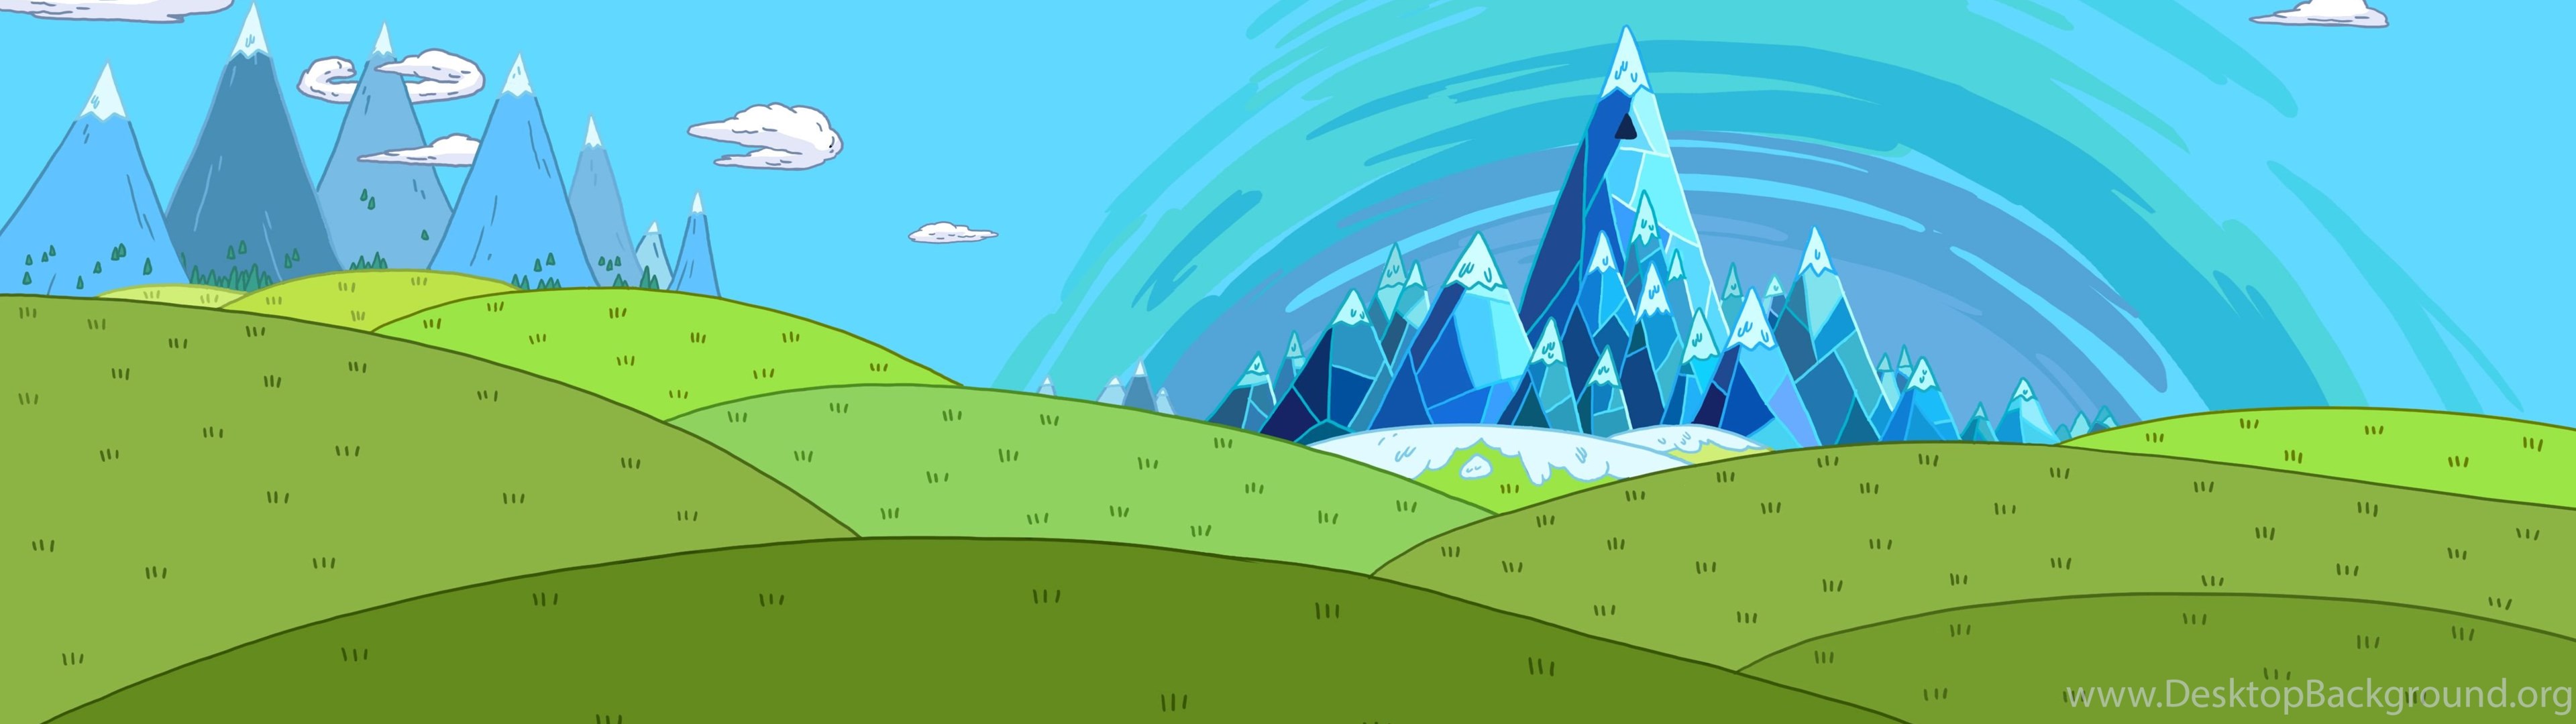 Adventure Time Dual Monitor Wallpapers